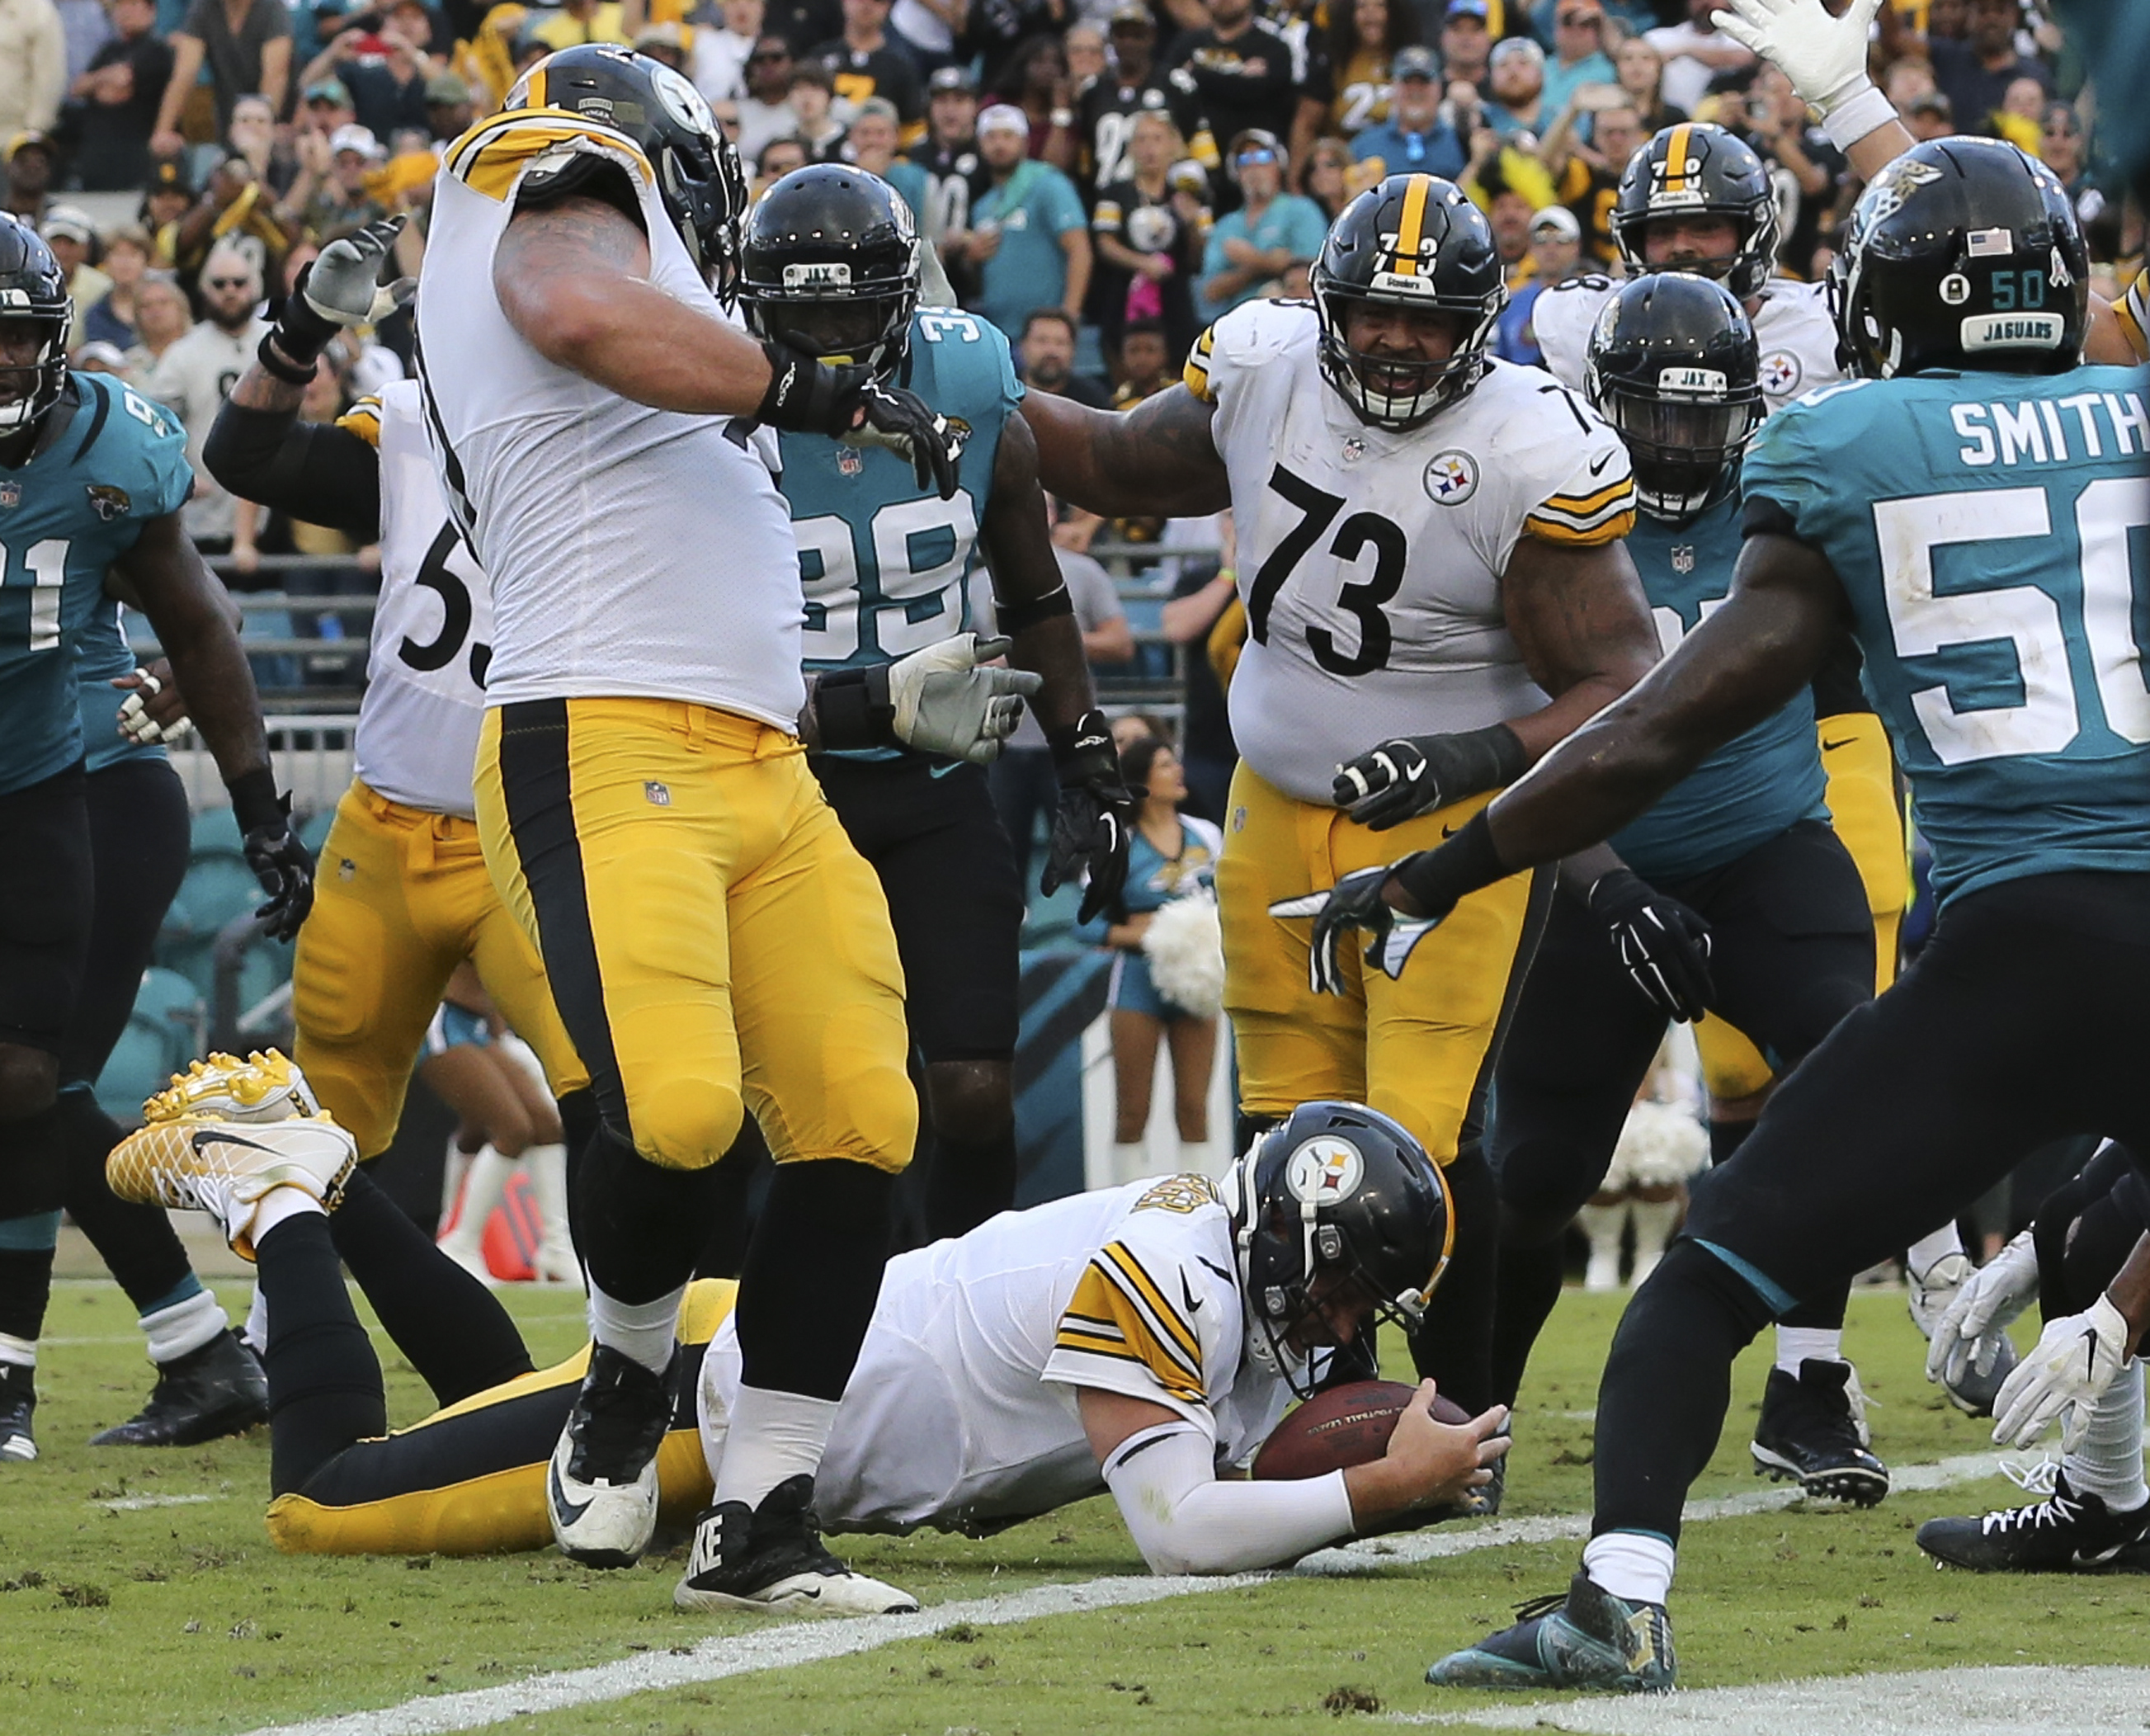 Steelers rally to stun Jaguars in final seconds, 20-16